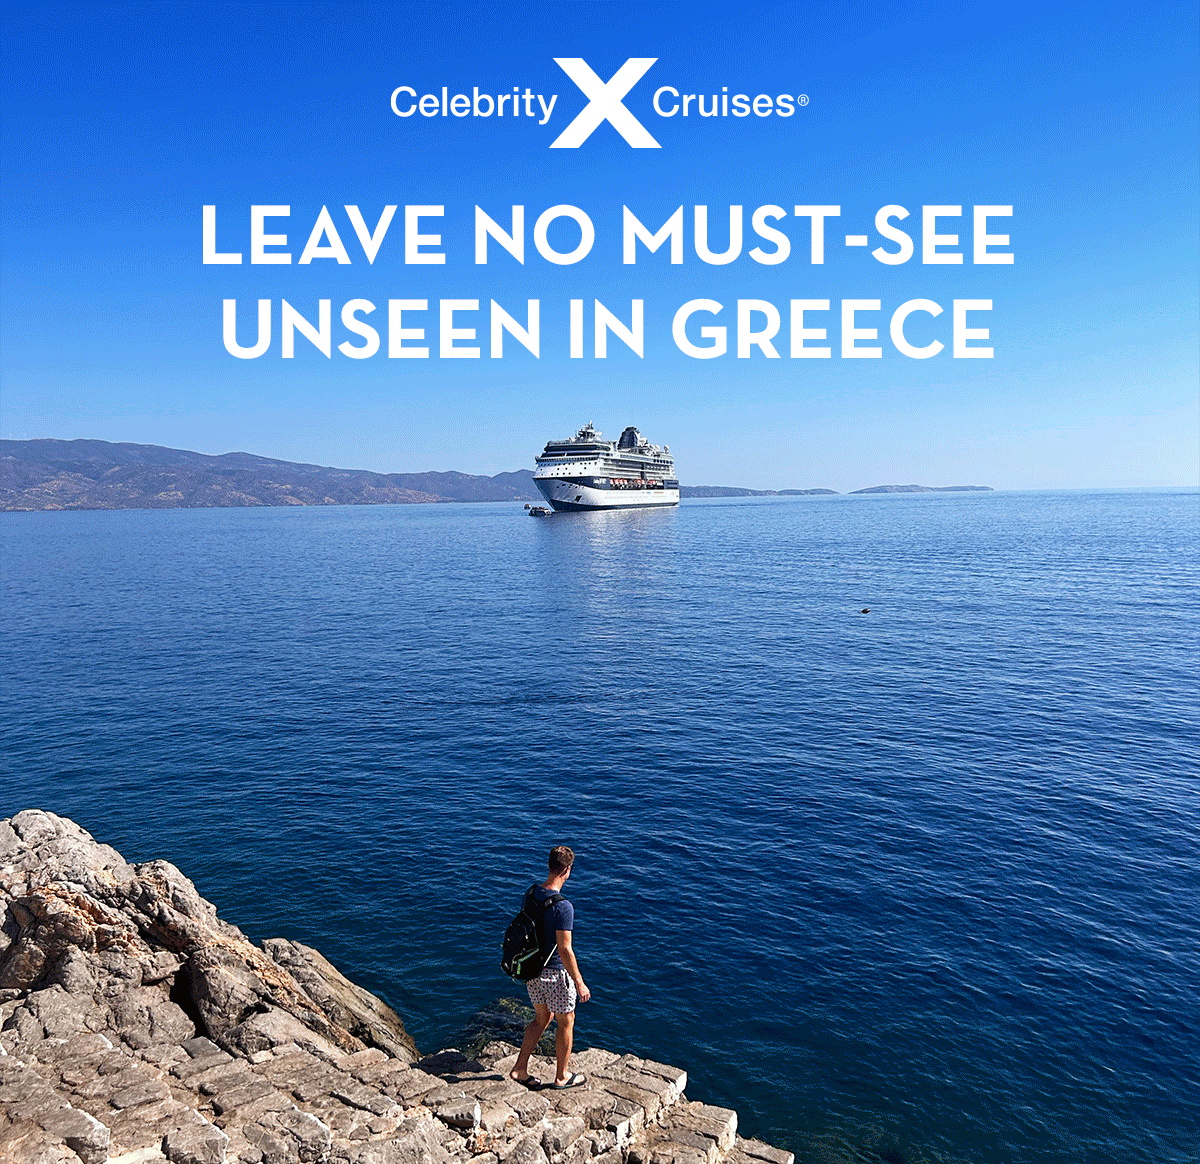 LEAVE NO MUST-SEE UNSEEN IN GREECE